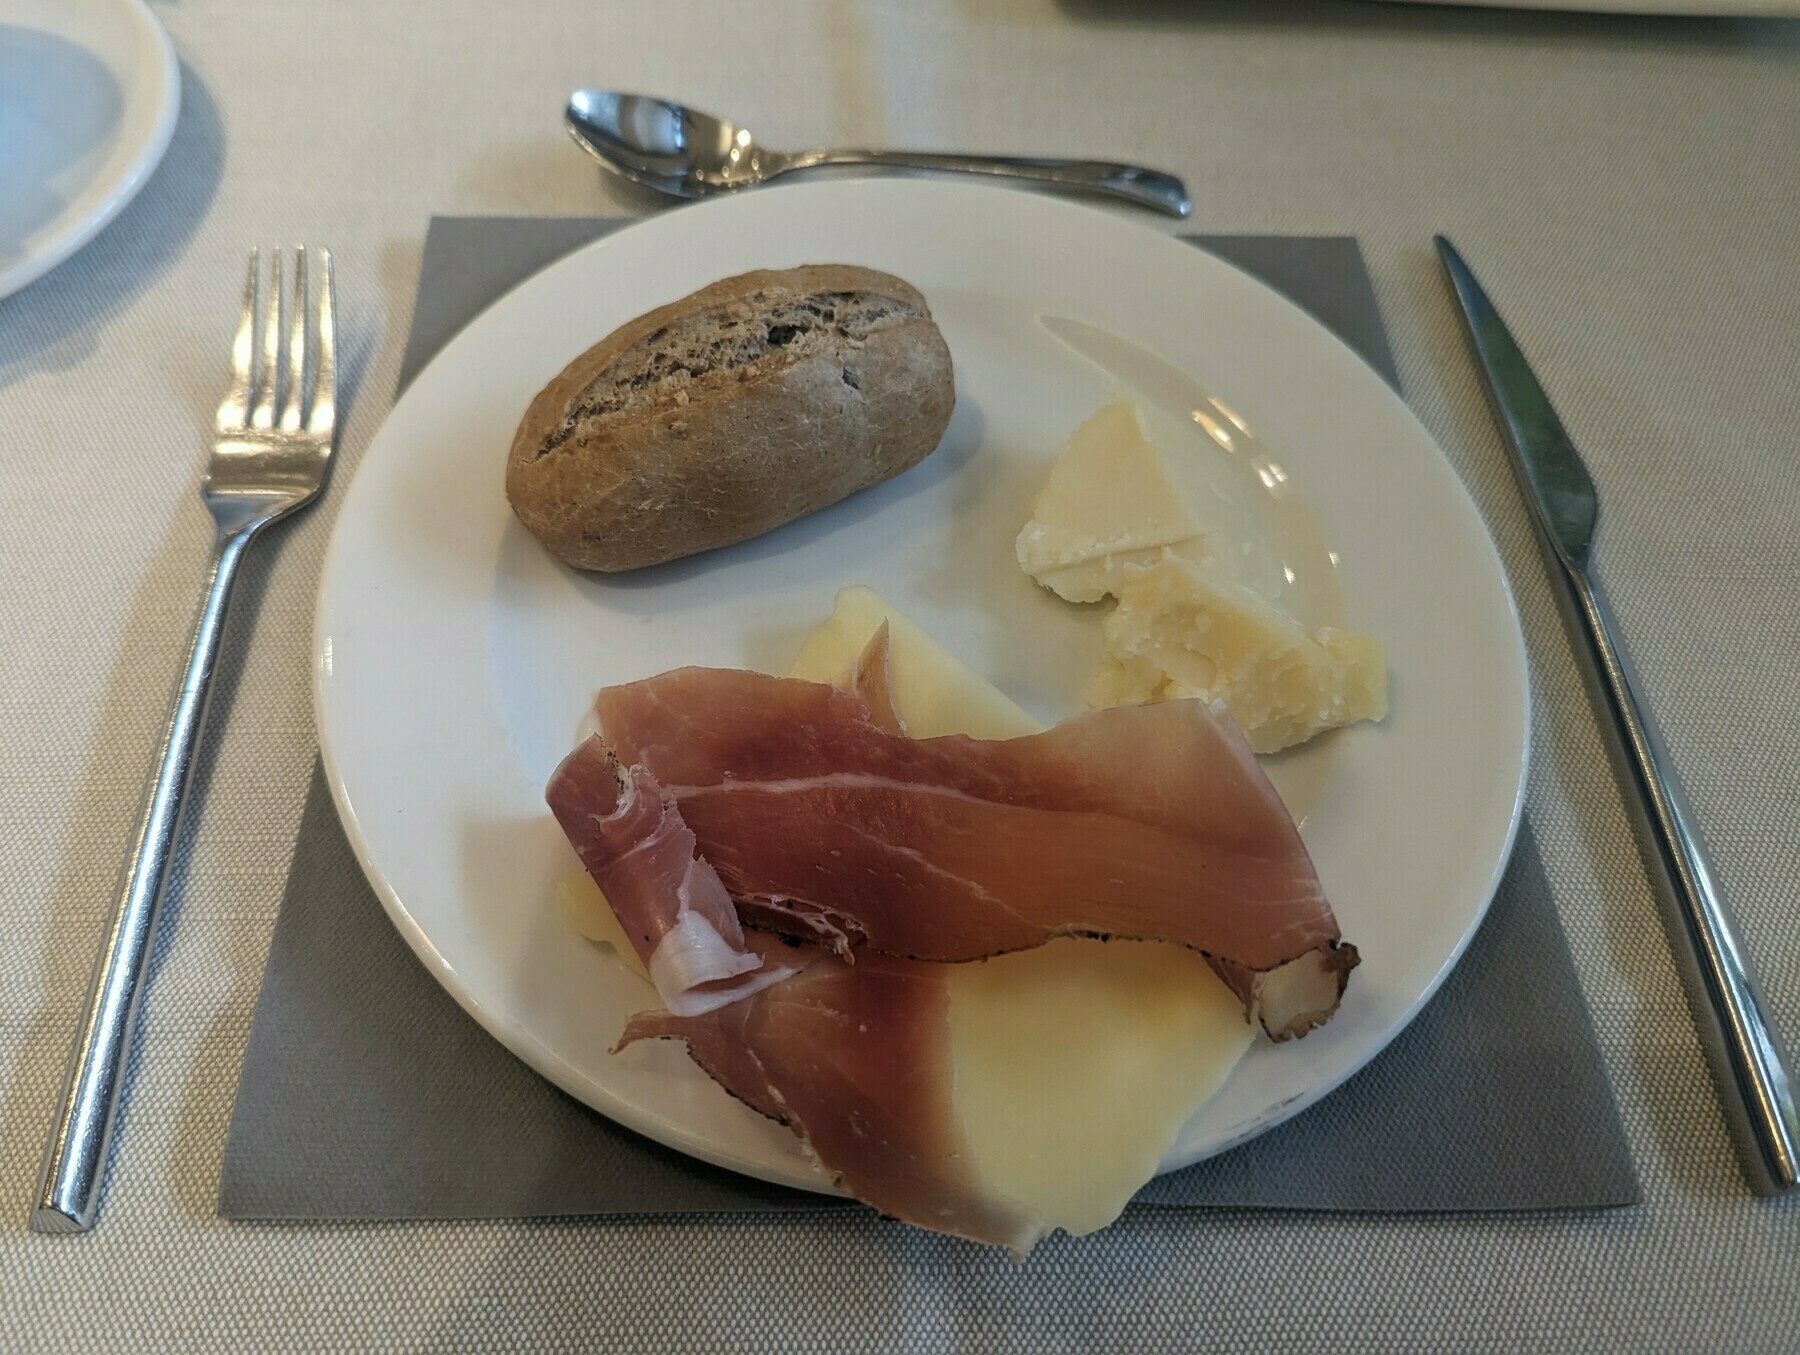 Plate on a place-mat with a wholemeal dinner roll, some parmesan cheese, slice of Jarlsberg cheese, and prosciutto. A silver knife and fork are beside it.